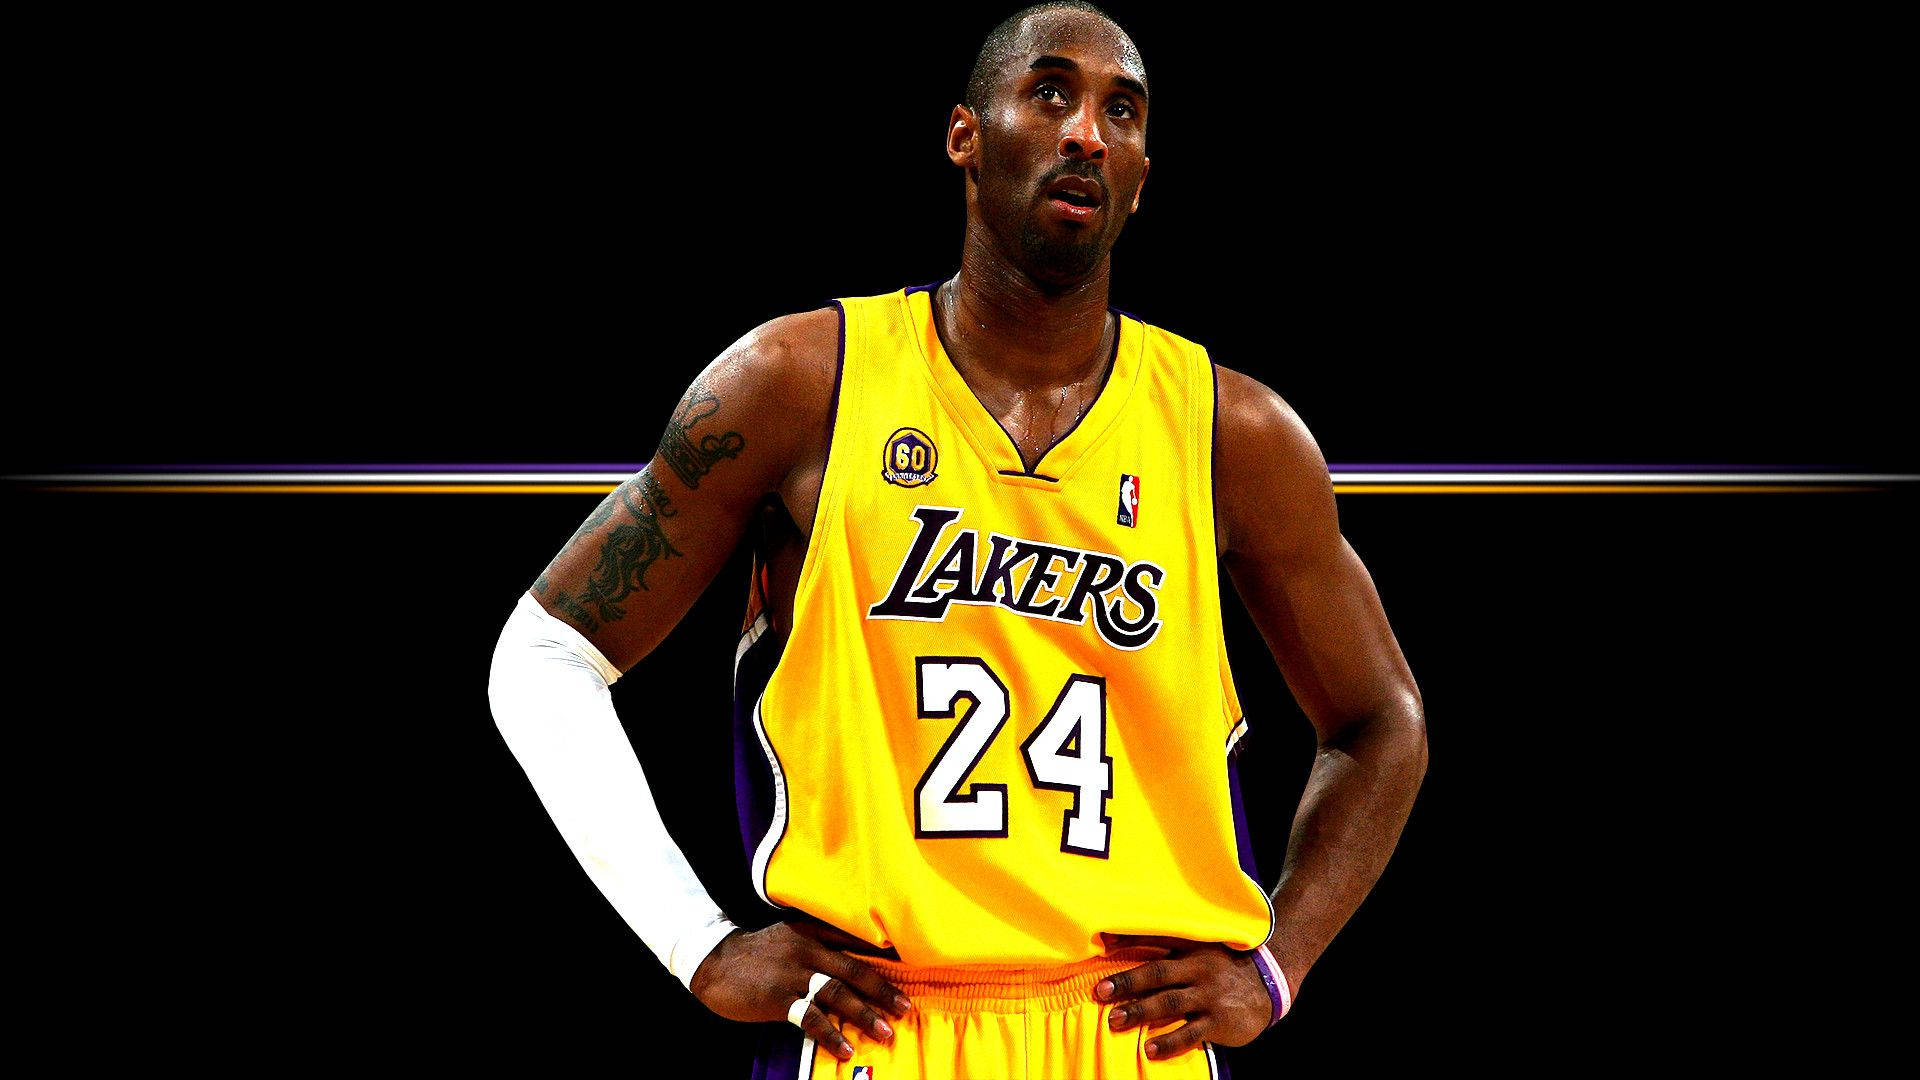 Hands On Waists Kobe Bryant Cool Background